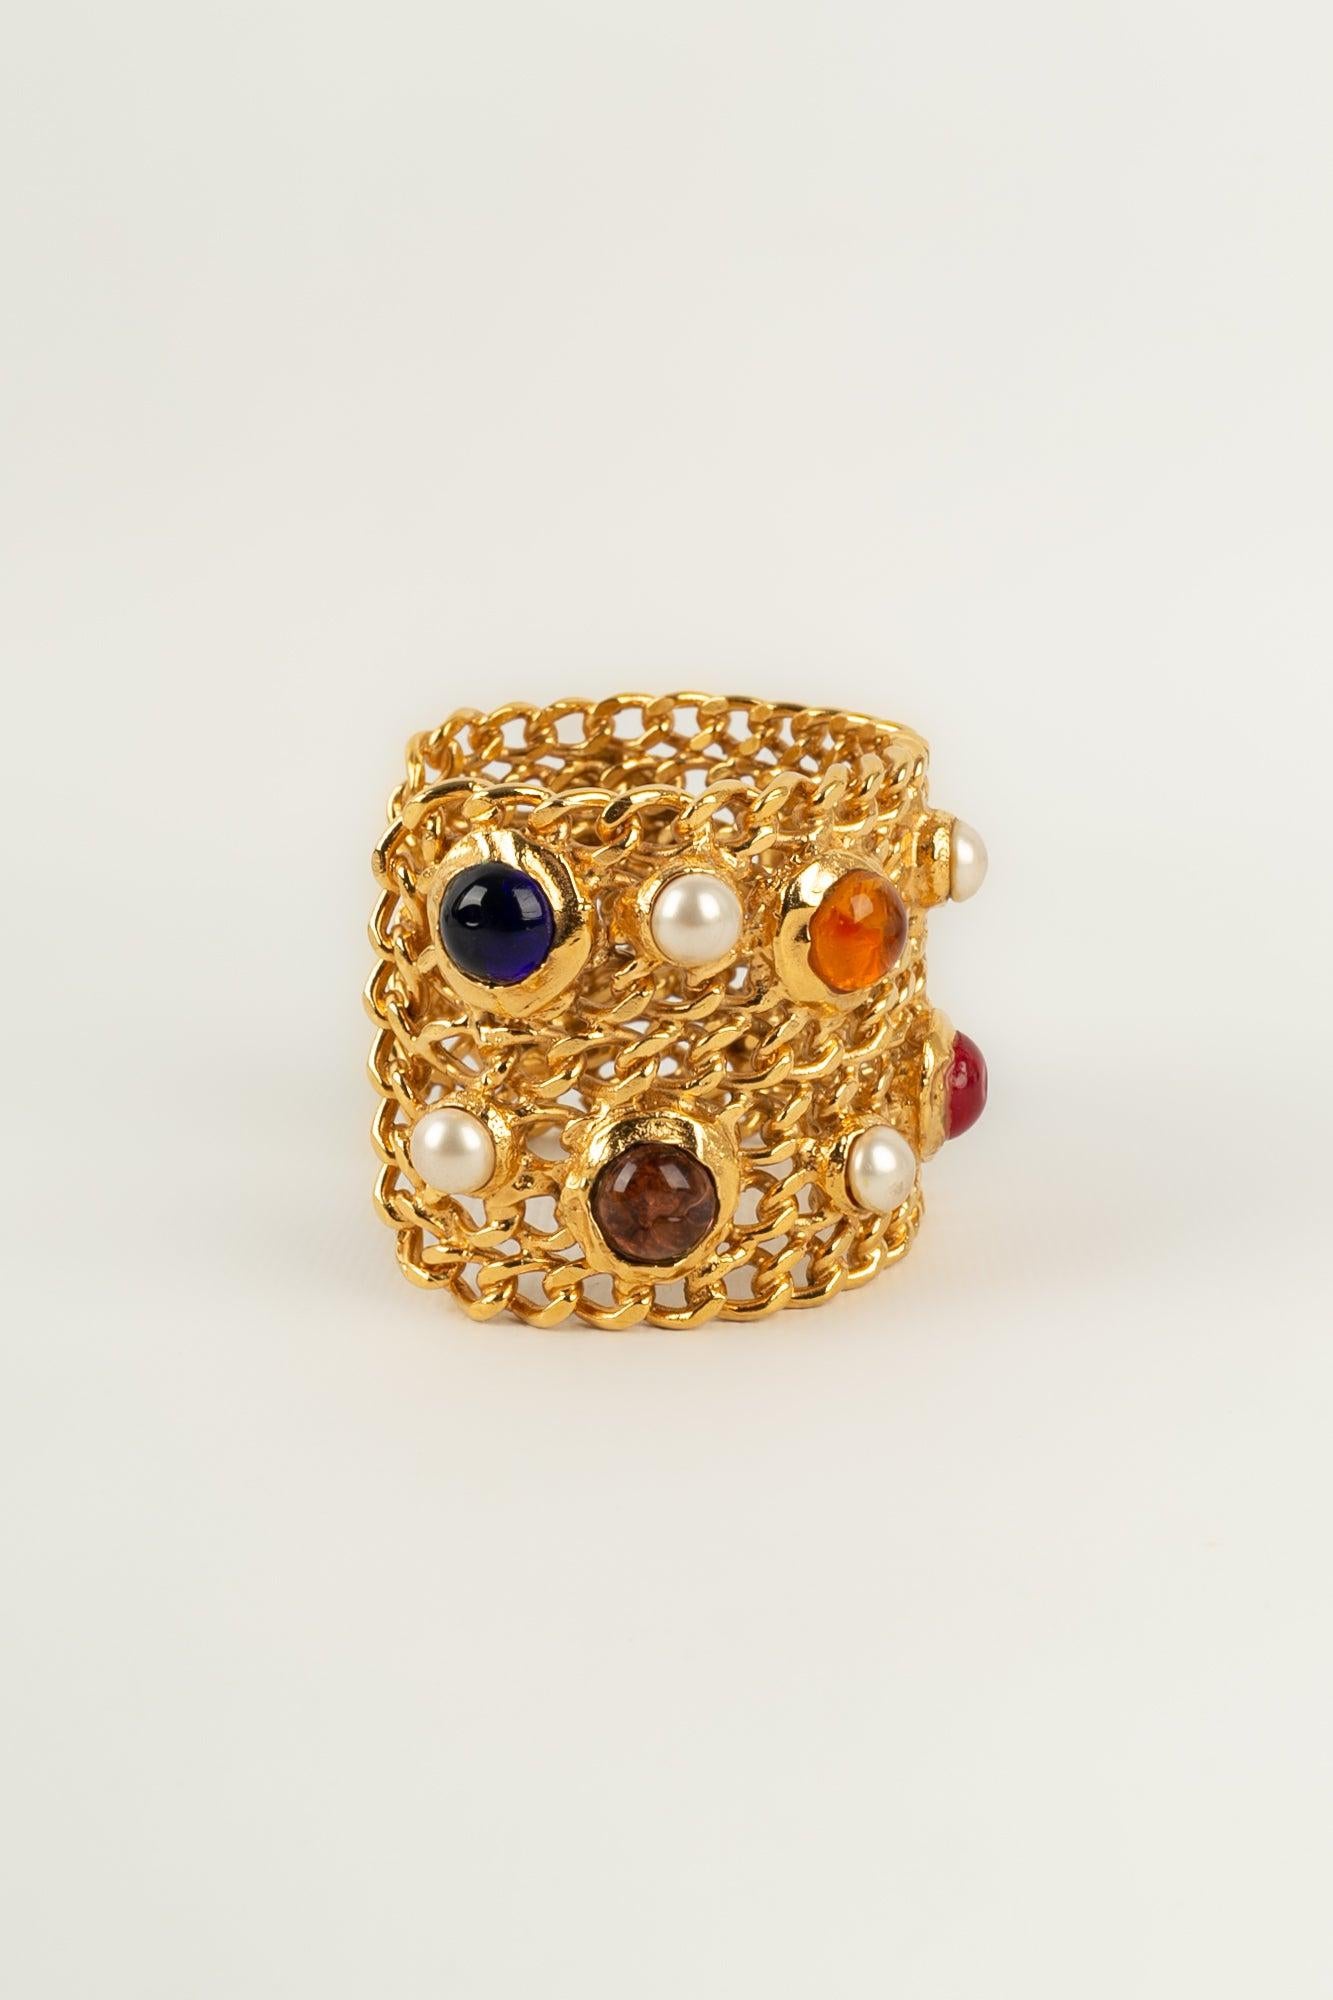 Chanel Cuff Bracelet in Golden Metal with Cabochons For Sale 1